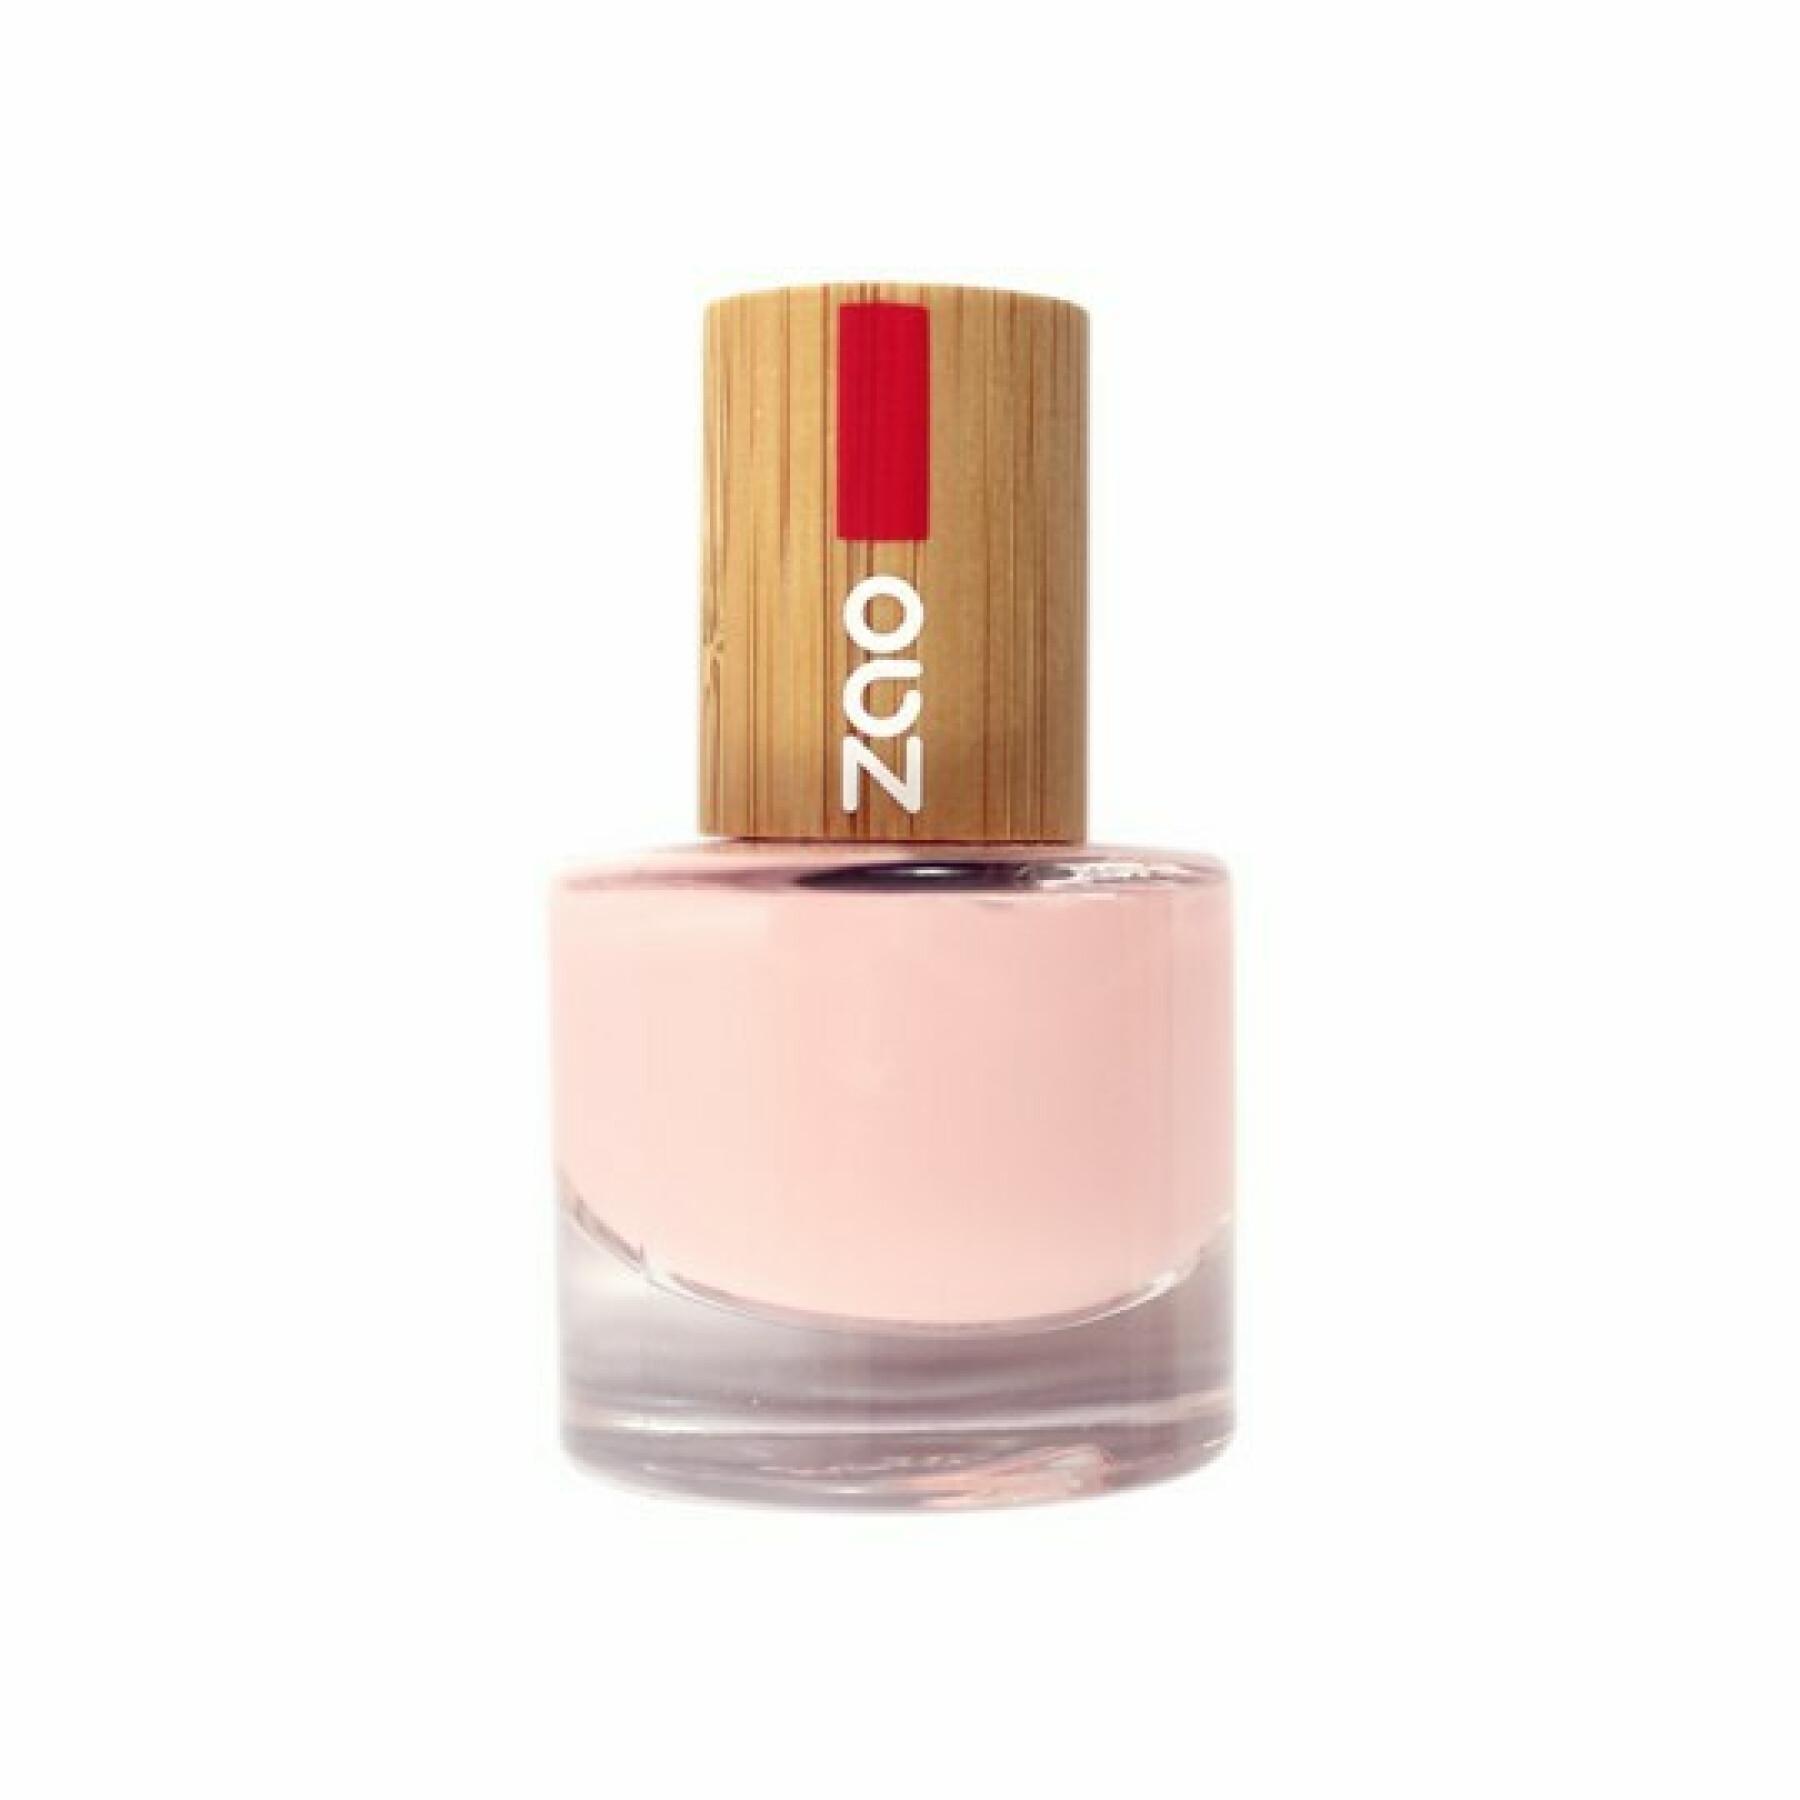 Vernis à ongles French manucure 642 beige femme Zao - 8 ml